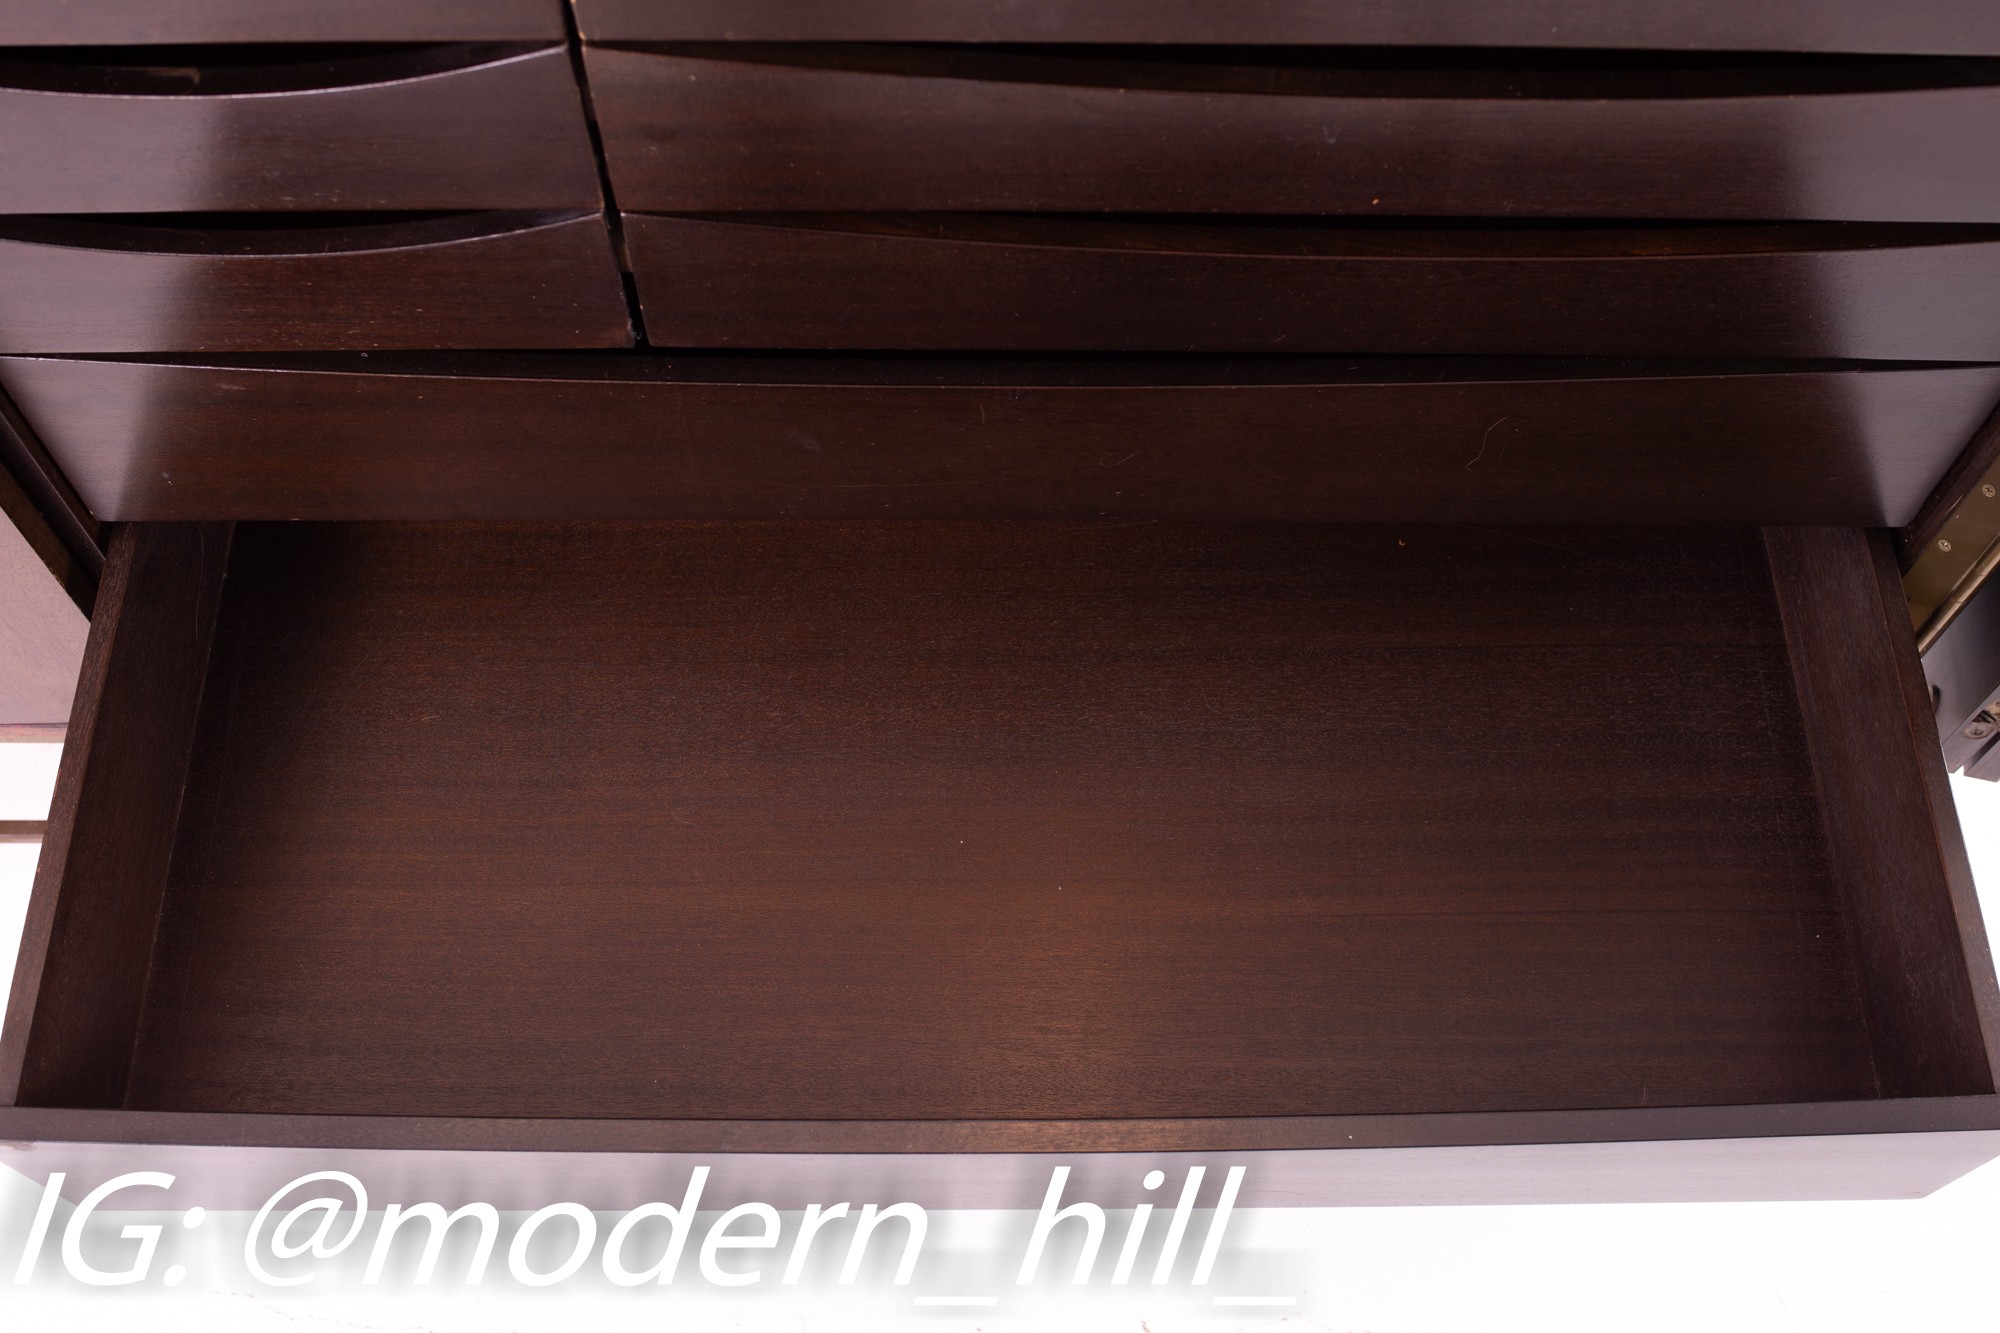 Paul Mccobb for Calvin Mid Century 16 Drawer Mahogany and Brass Sideboard Buffet Credenza